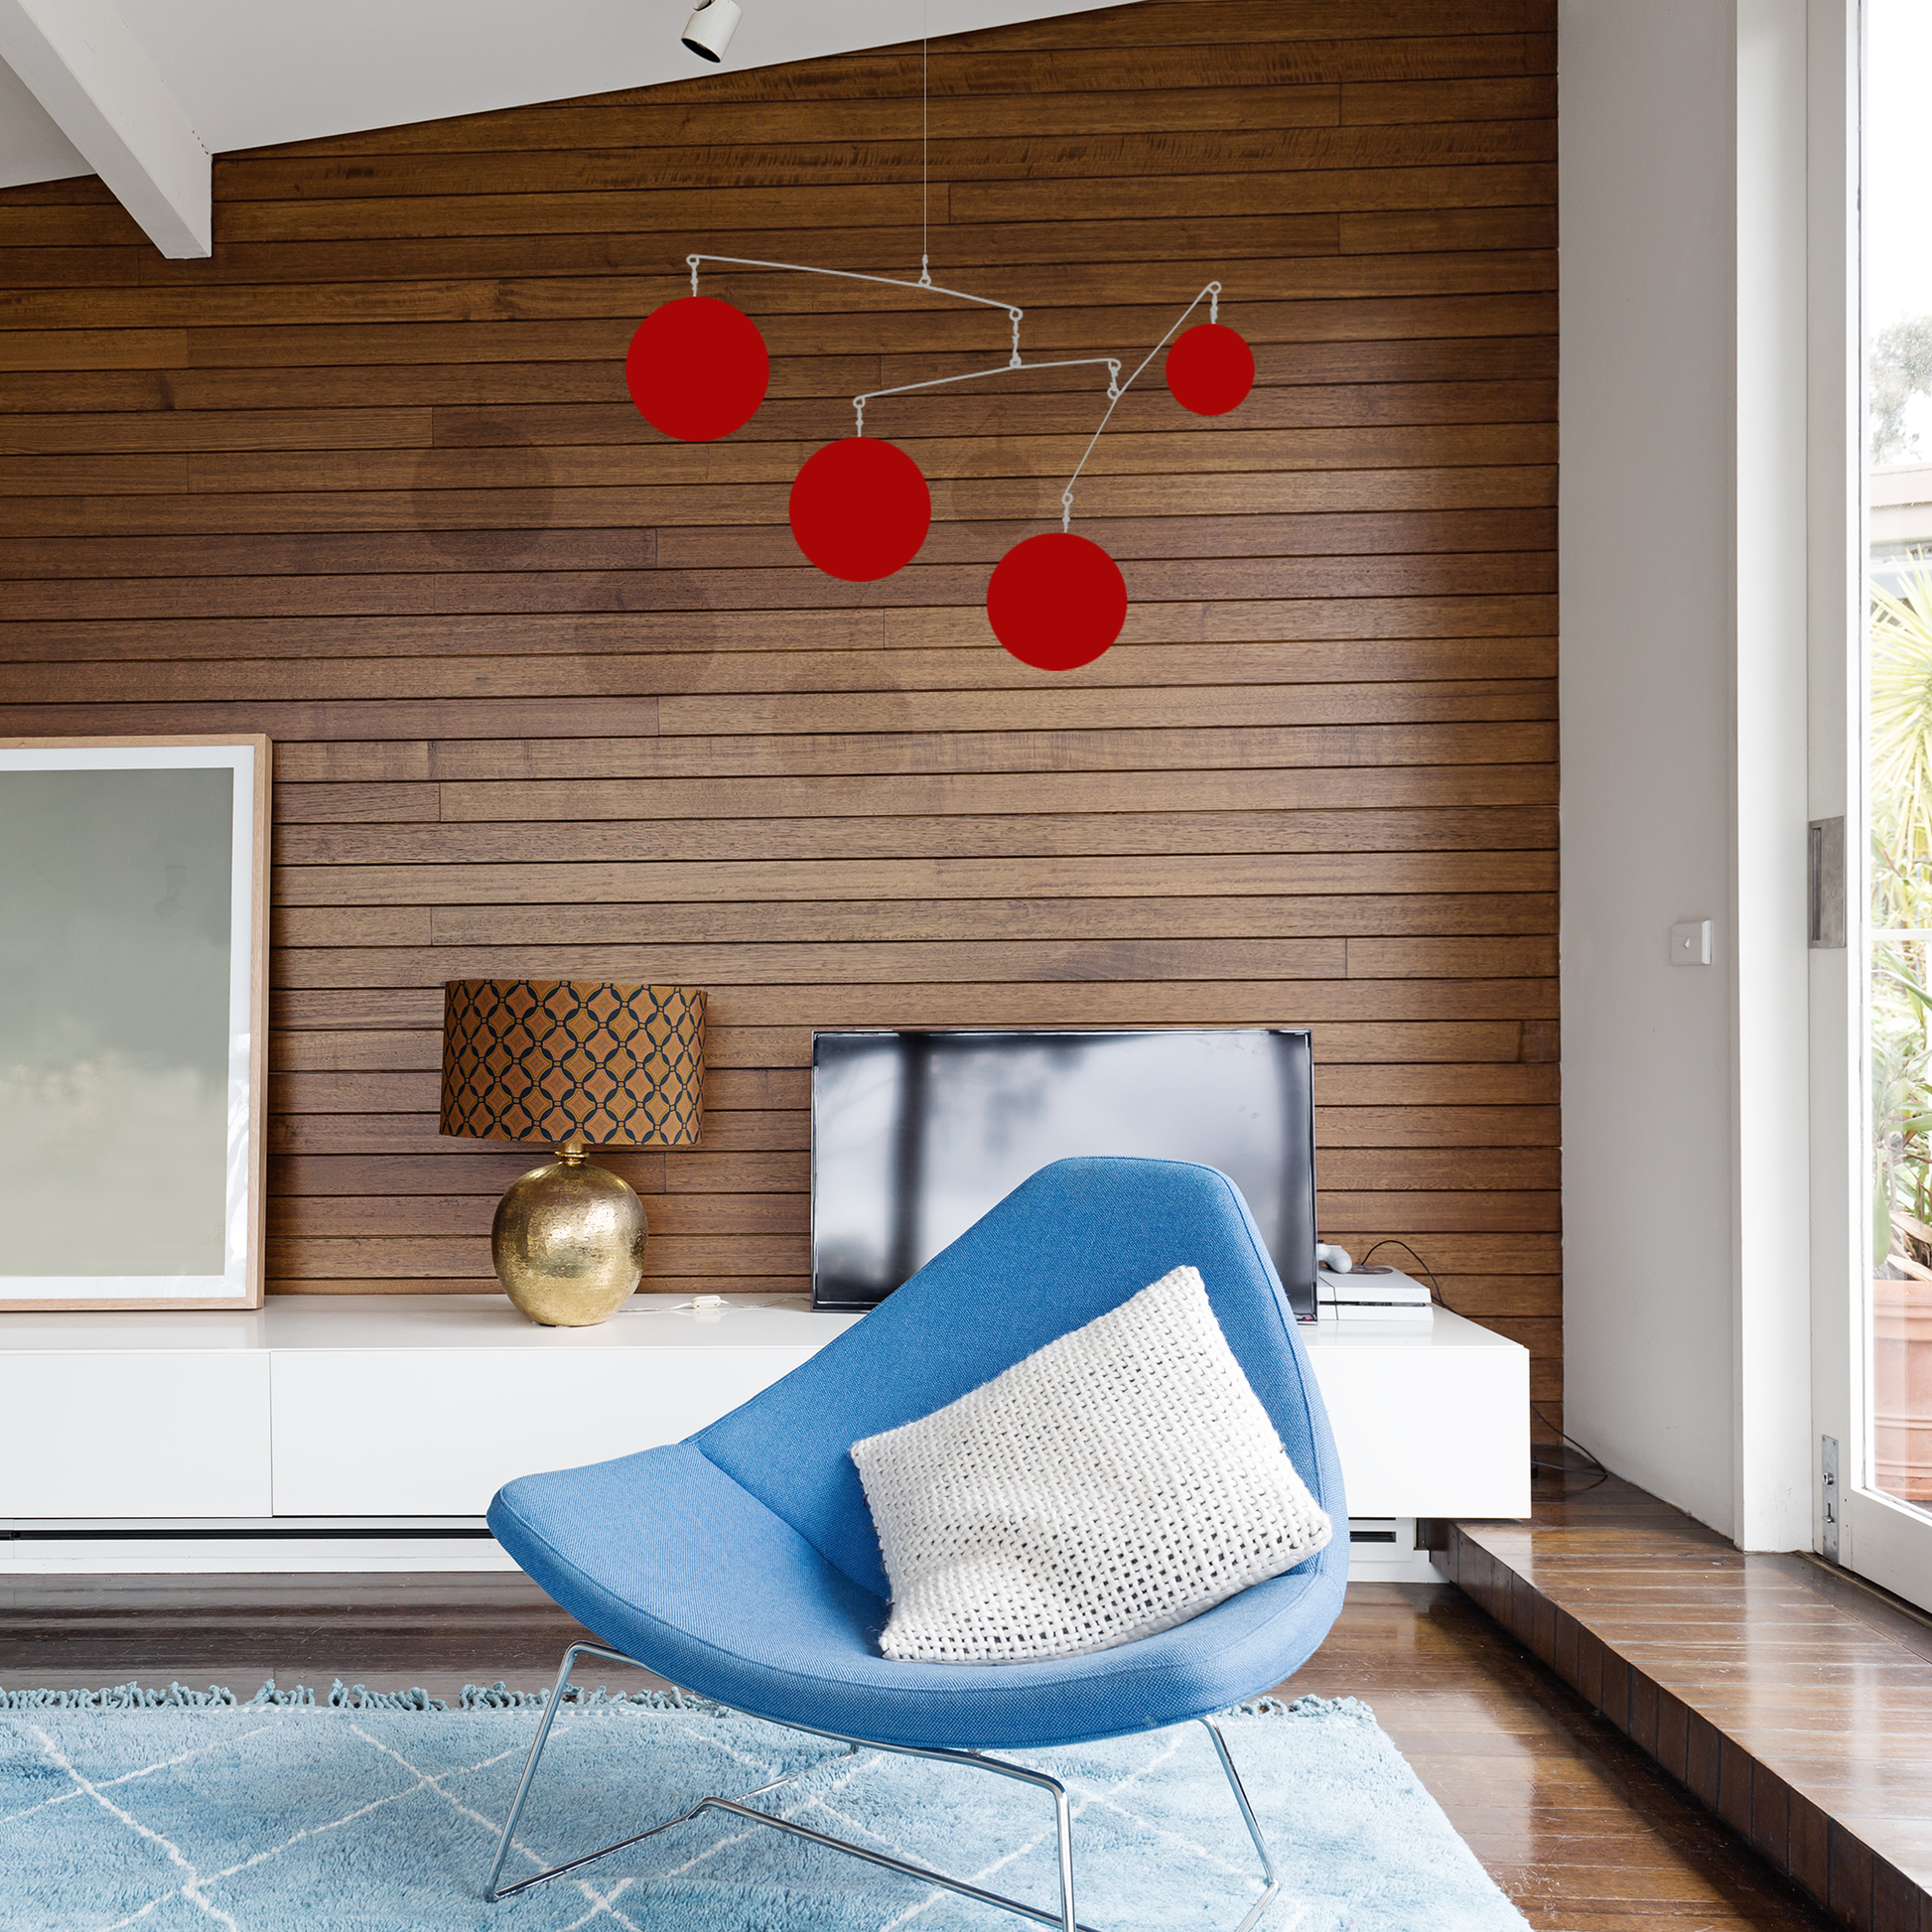 Mid century modern living room with blue chair, wood paneled wall,  and red Jetsetter XL kinetic hanging art mobile by AtomicMobiles.com